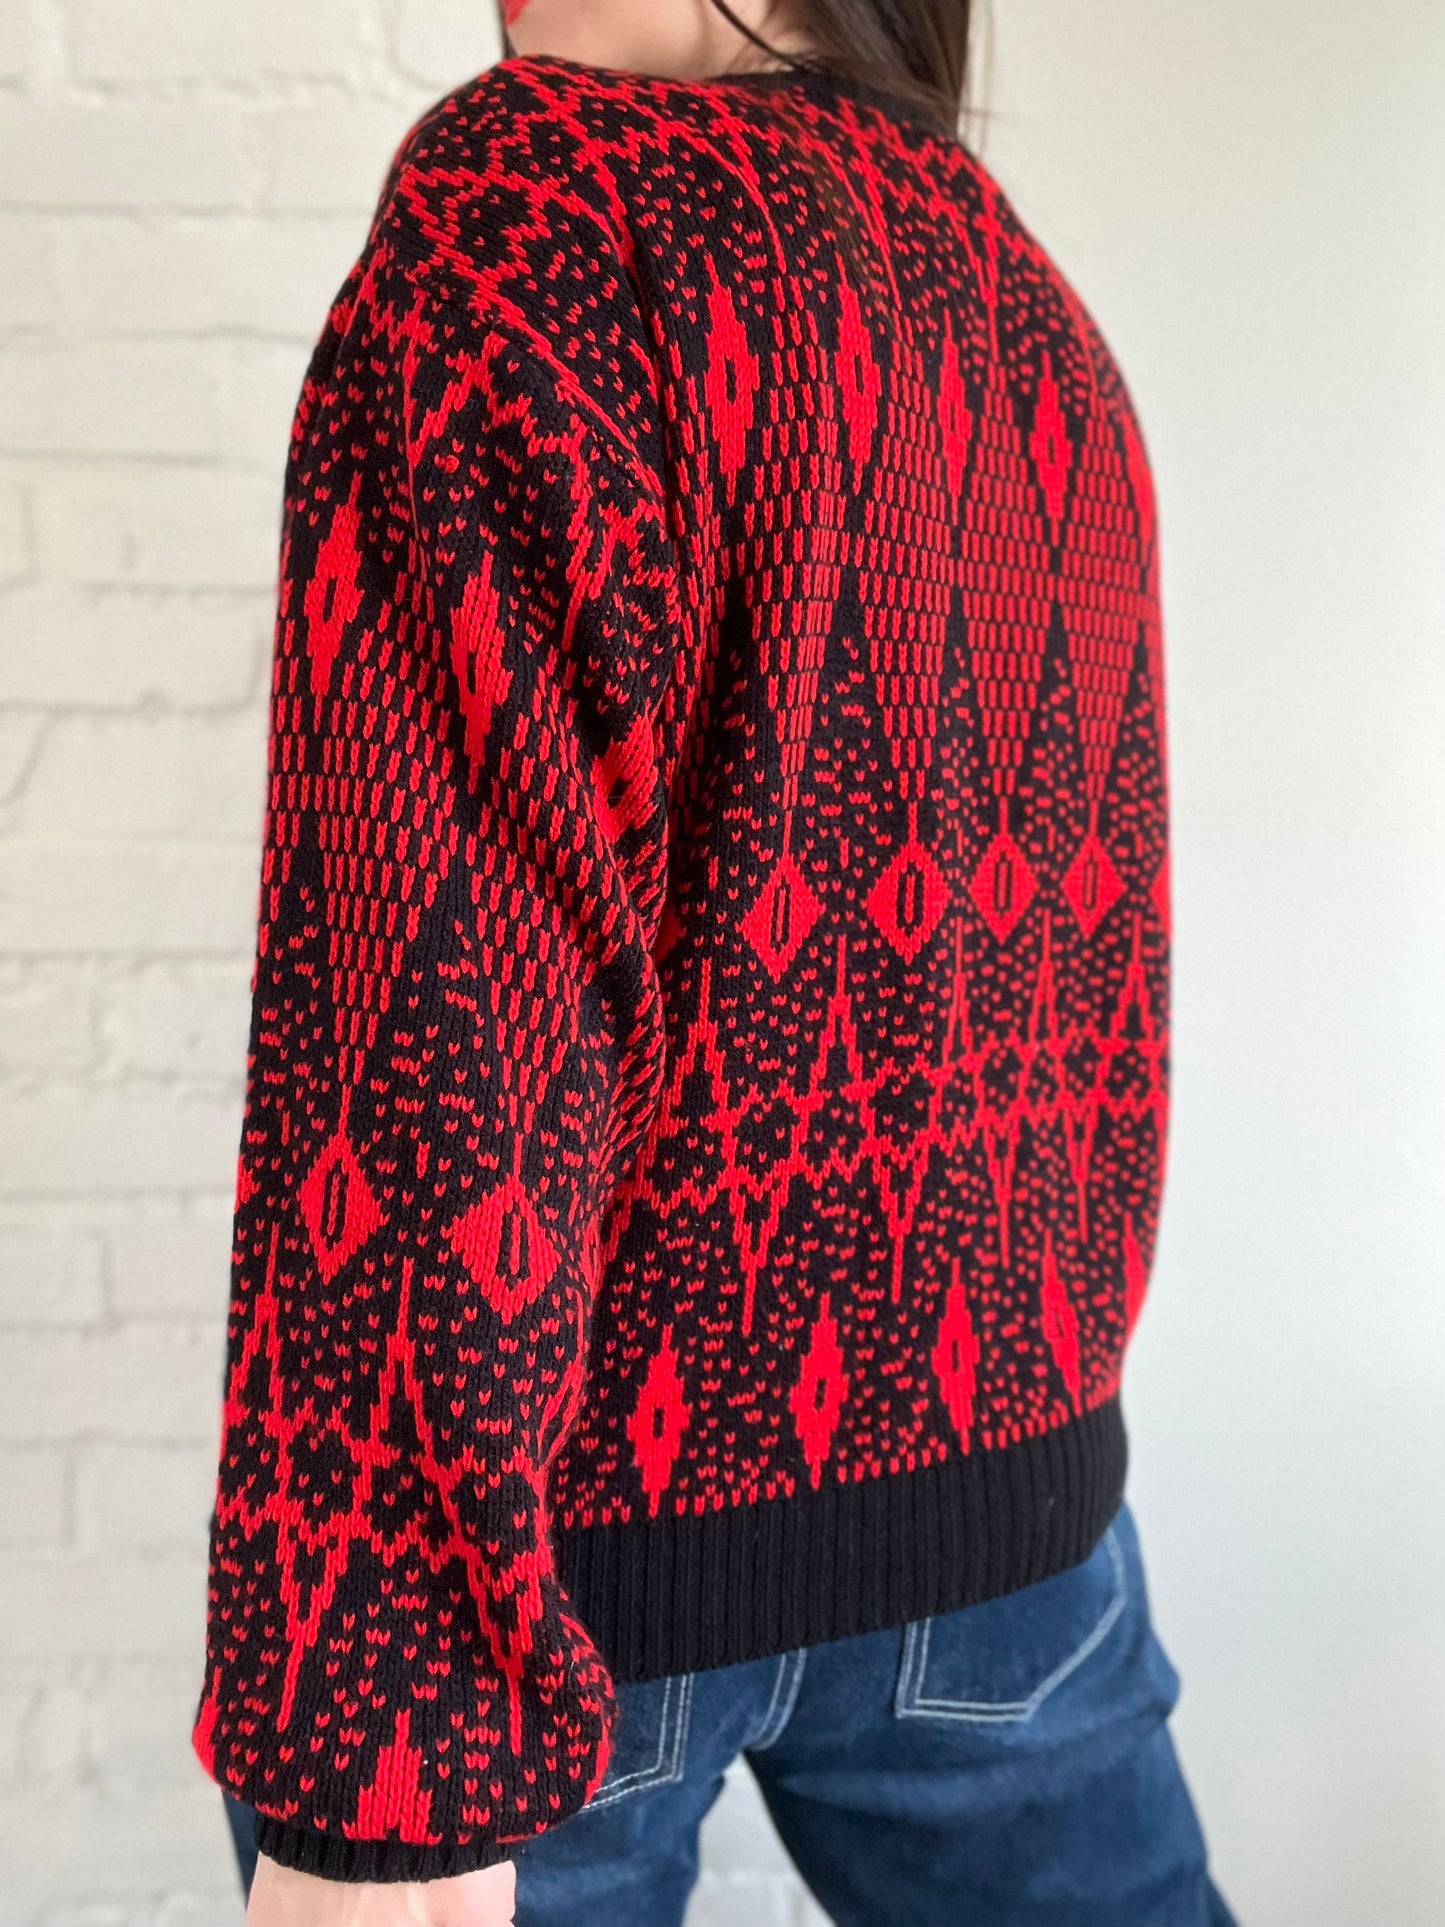 Black & Red Abstract Sweater - Size L/XL